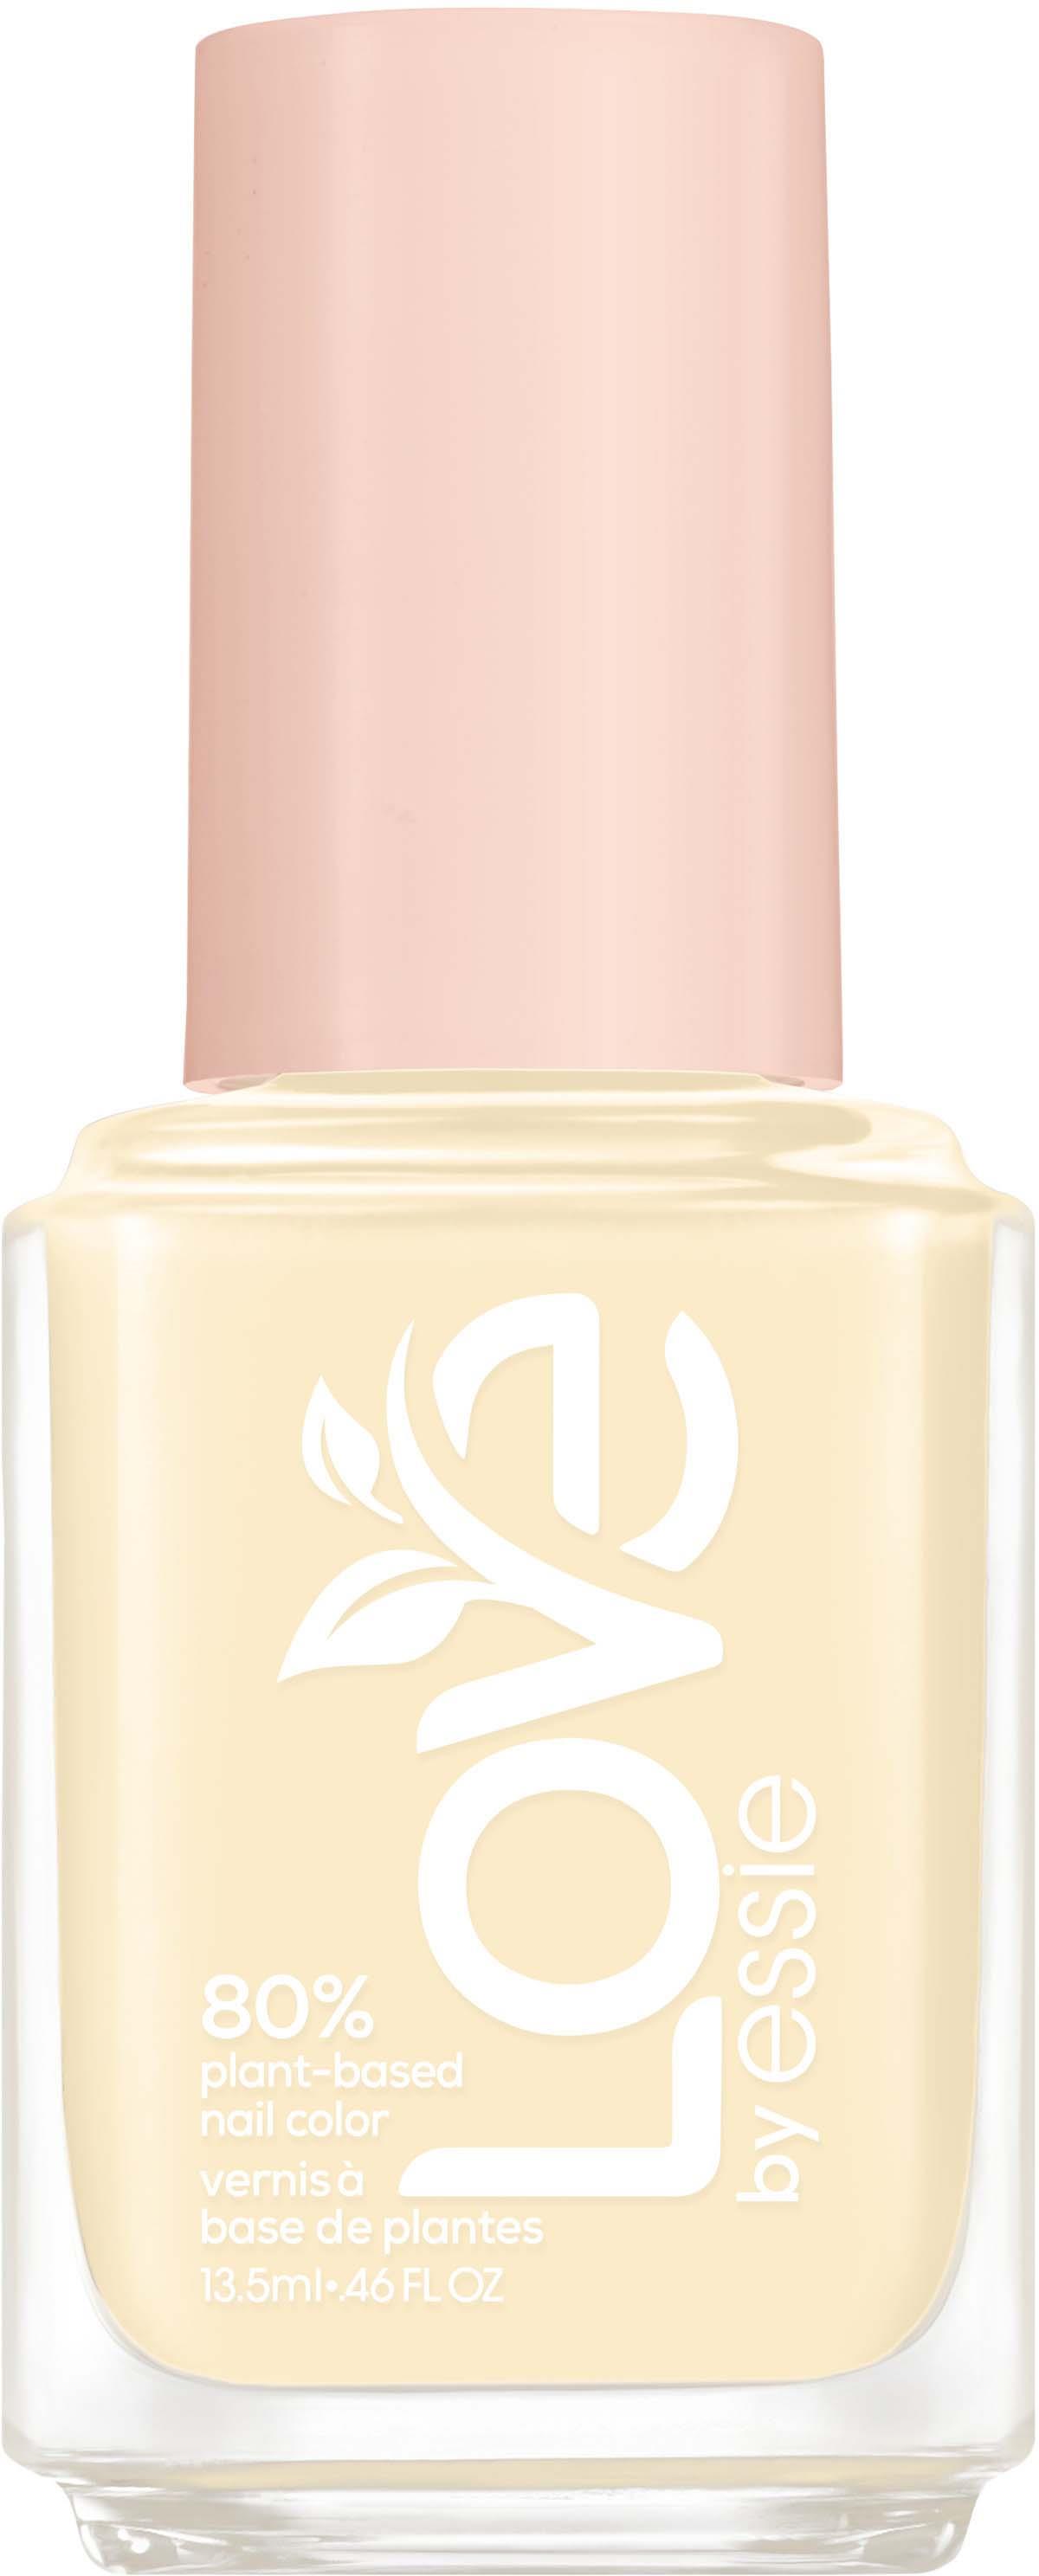 Essie LOVE by Essie 80% 230 The On Brighter Side Nail Color Plant-based